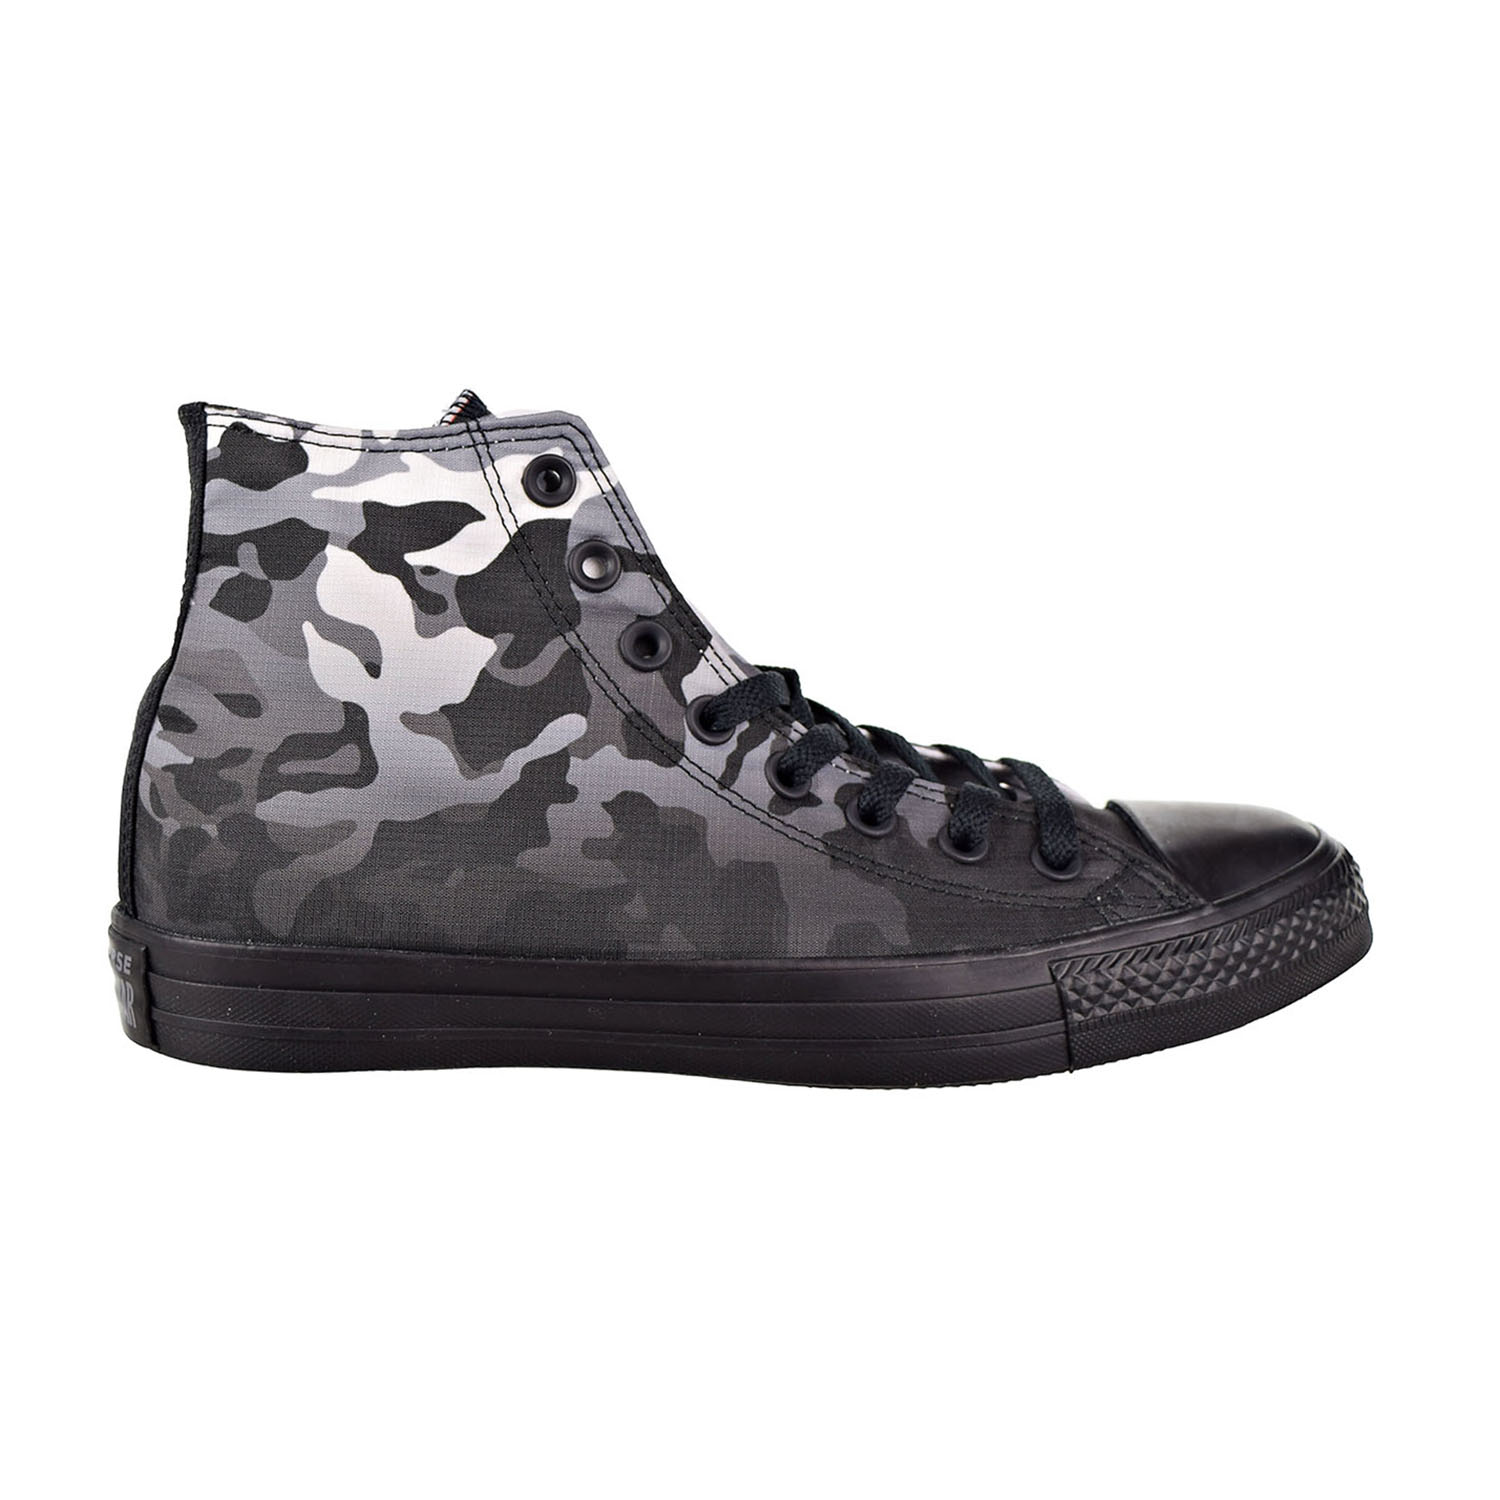 converse camouflage shoes Online 